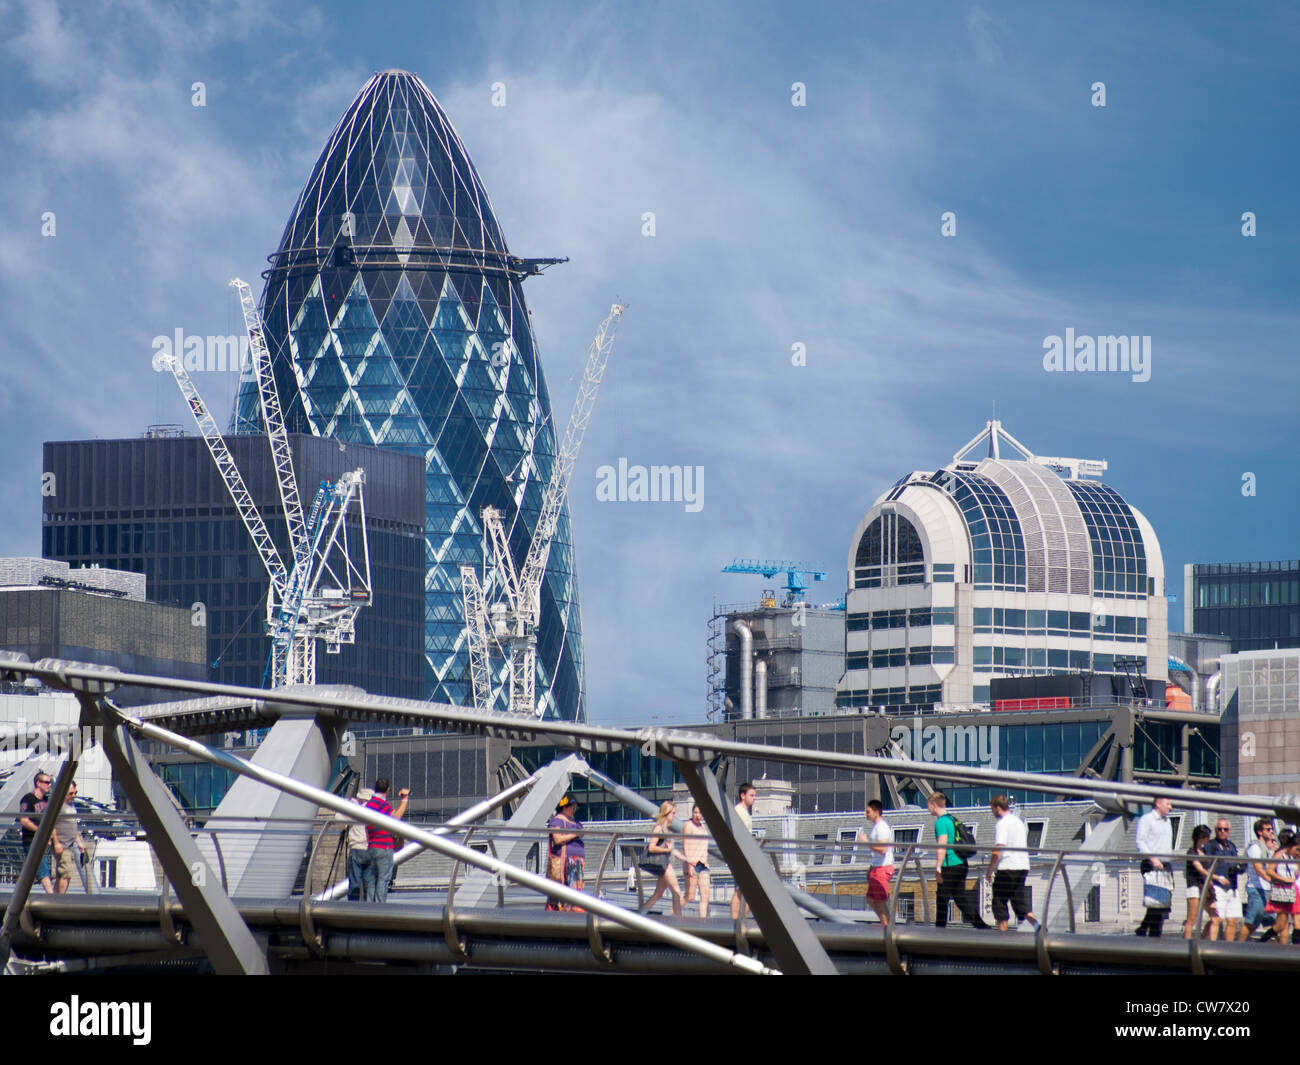 The Gherkin and cranes, Millennium Bridge in the foreground, London 2 Stock Photo